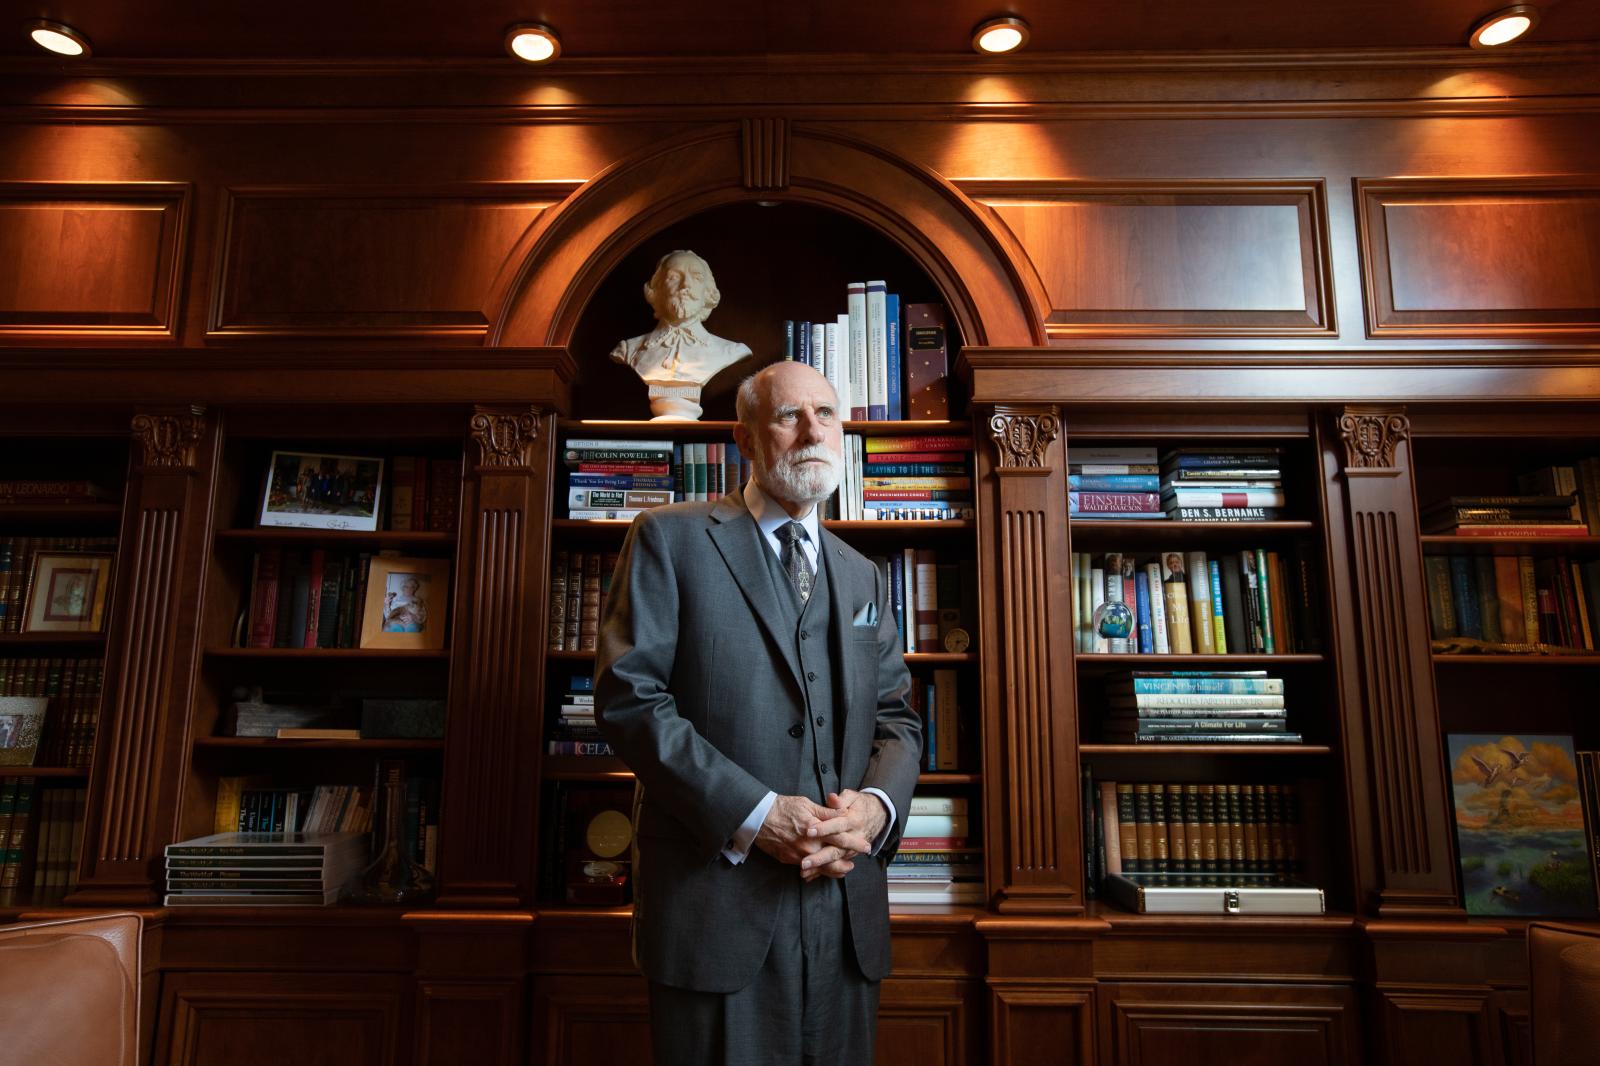 Image from PORTRAITS - Vinton Cerf, one of the fathers of the internet, has also...